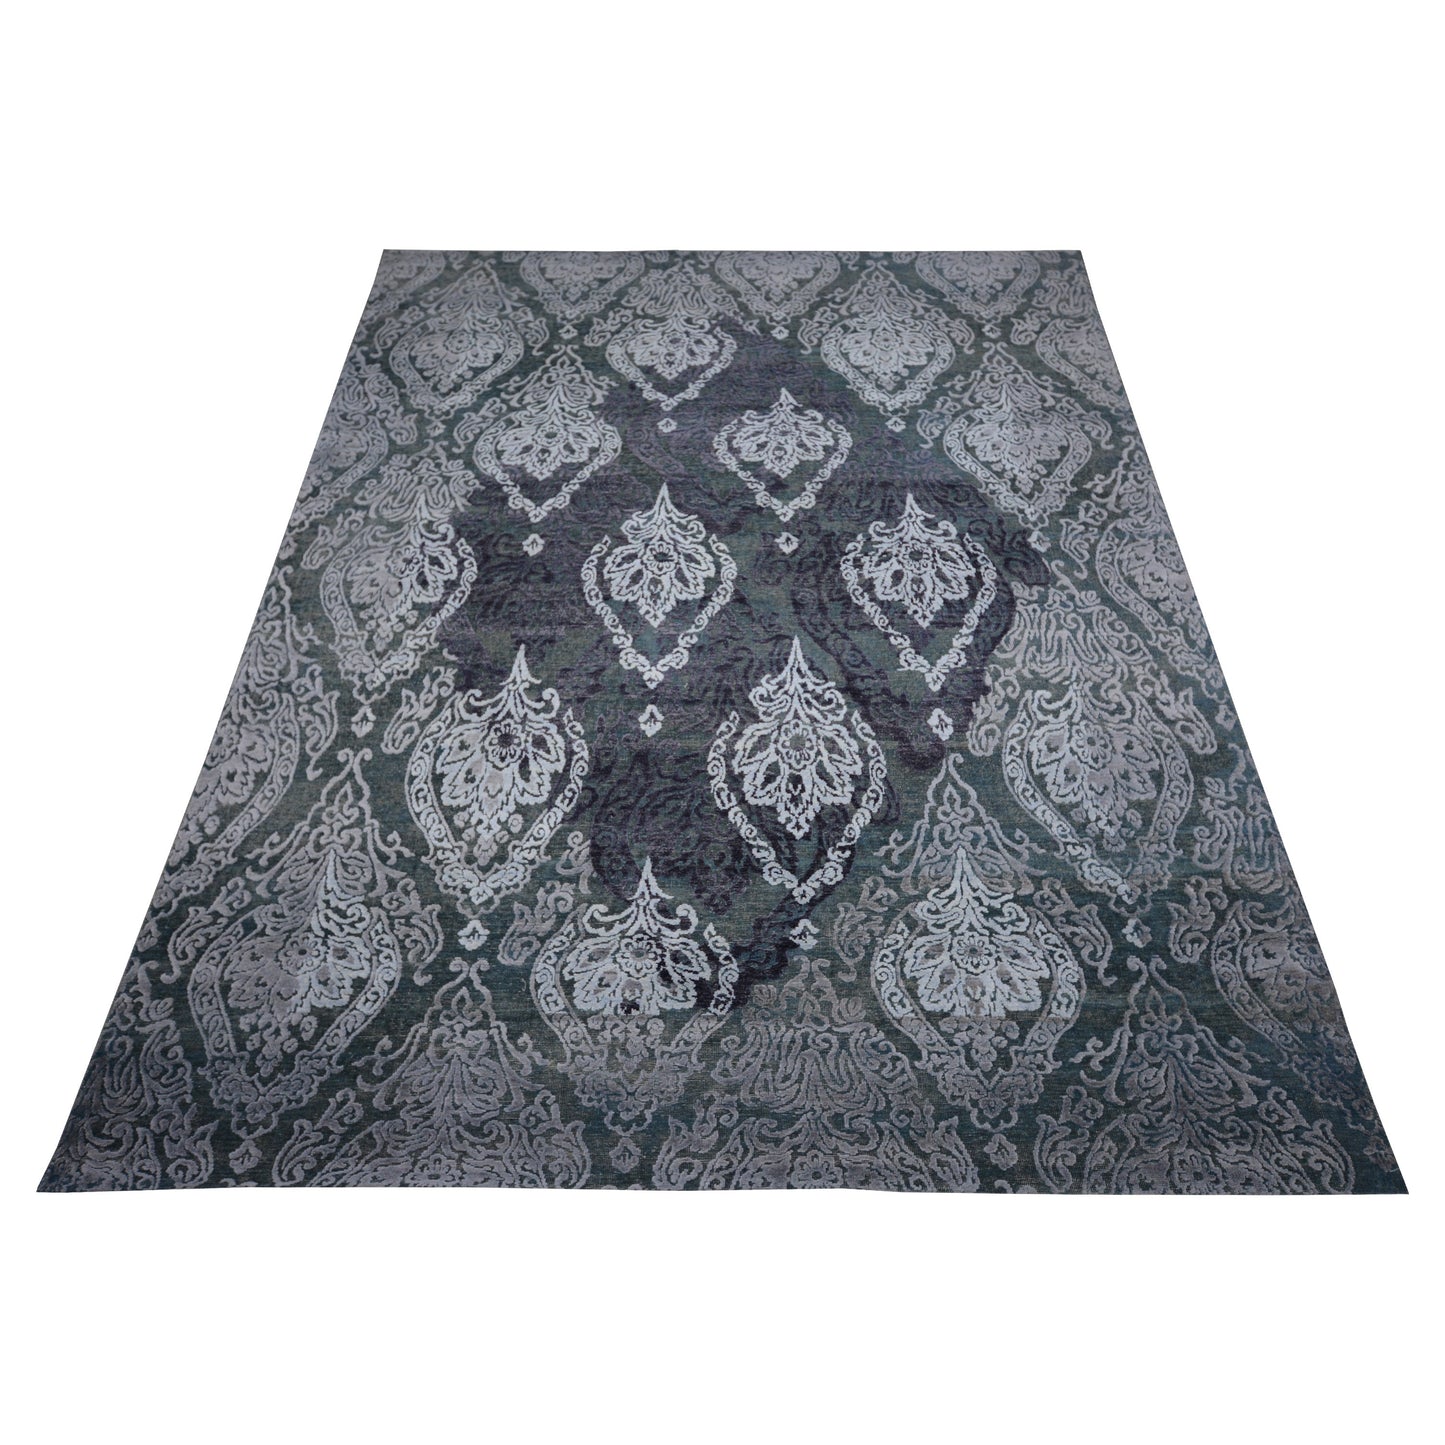 Get trendy with Lantern Damask Grey, Silver and Lavender Transitional Handknotted Area Rug - Contemporary Rugs available at Jaipur Oriental Rugs. Grab yours for $4195.00 today!